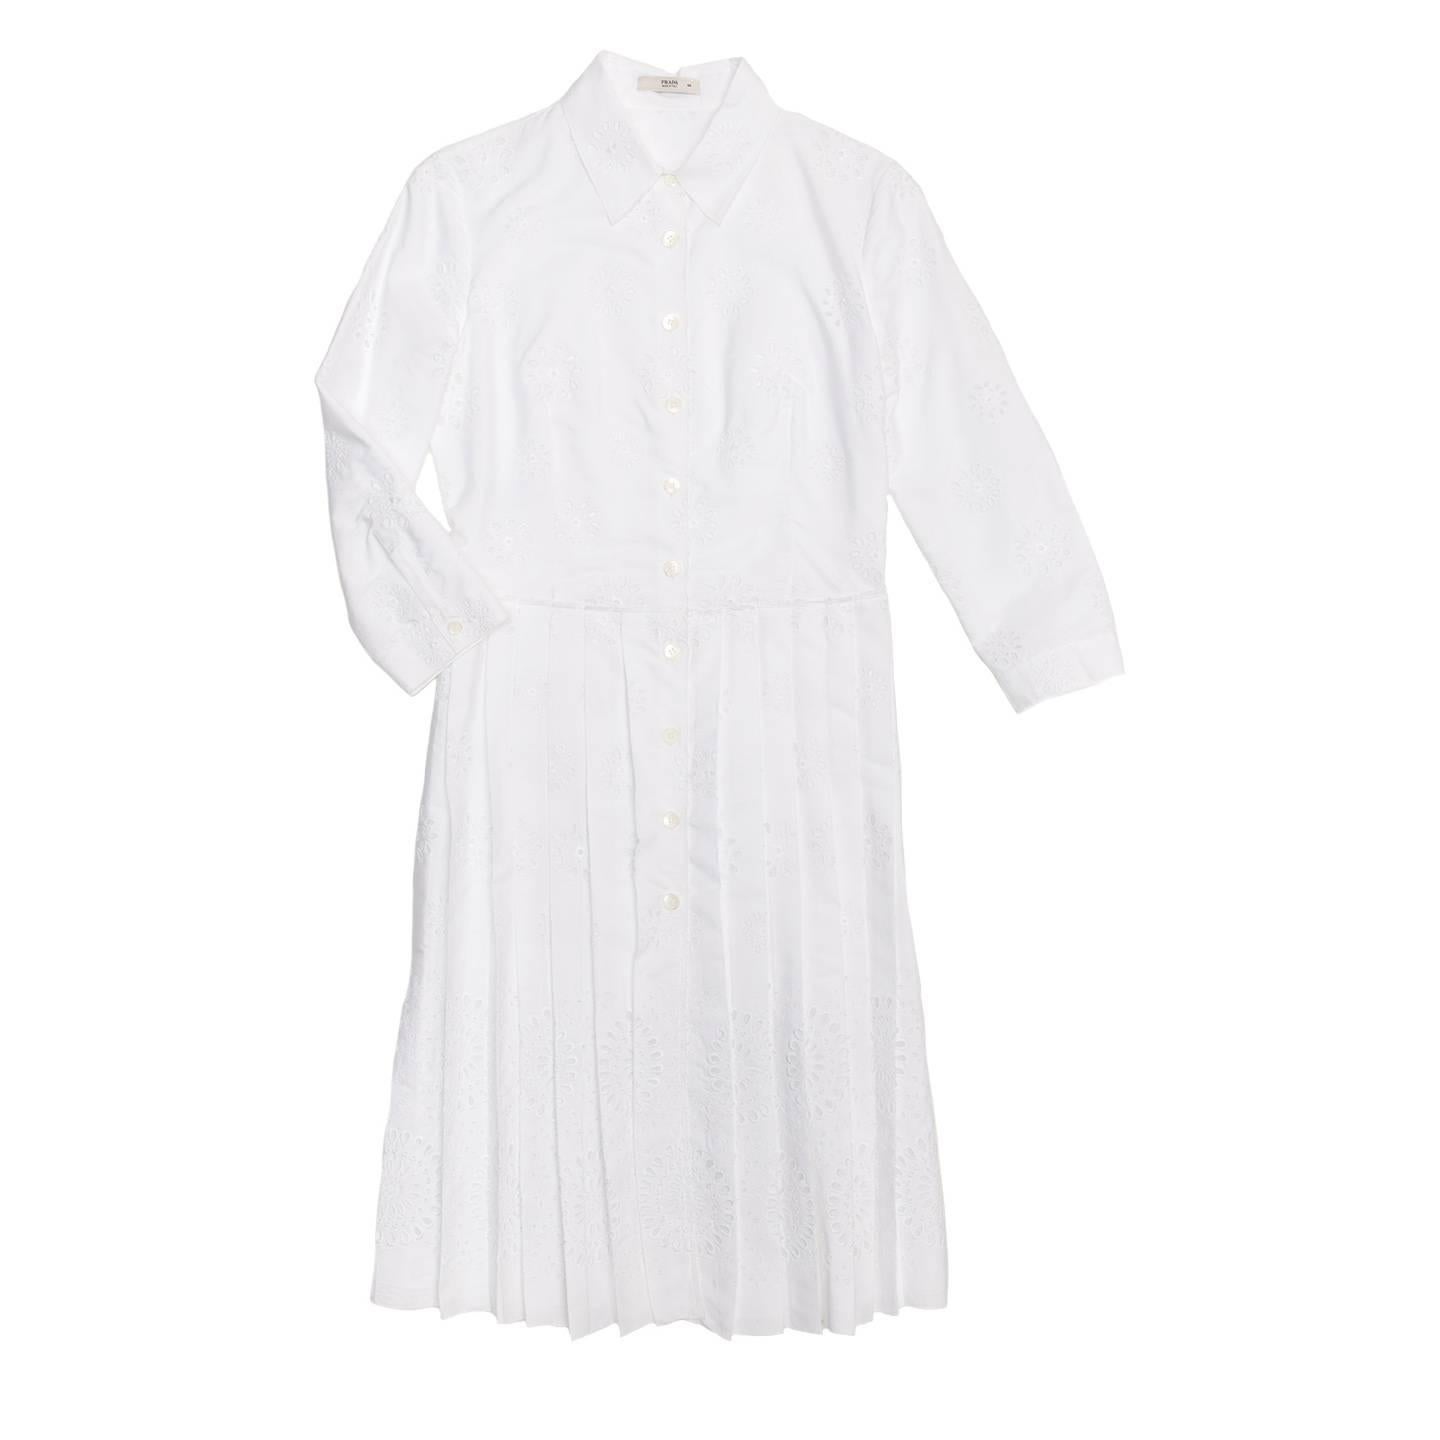 White cotton broderie anglaise shirtdress with knee length pleated skirt.

Size  44 Italian sizing

Condition  Excellent: worn a few times